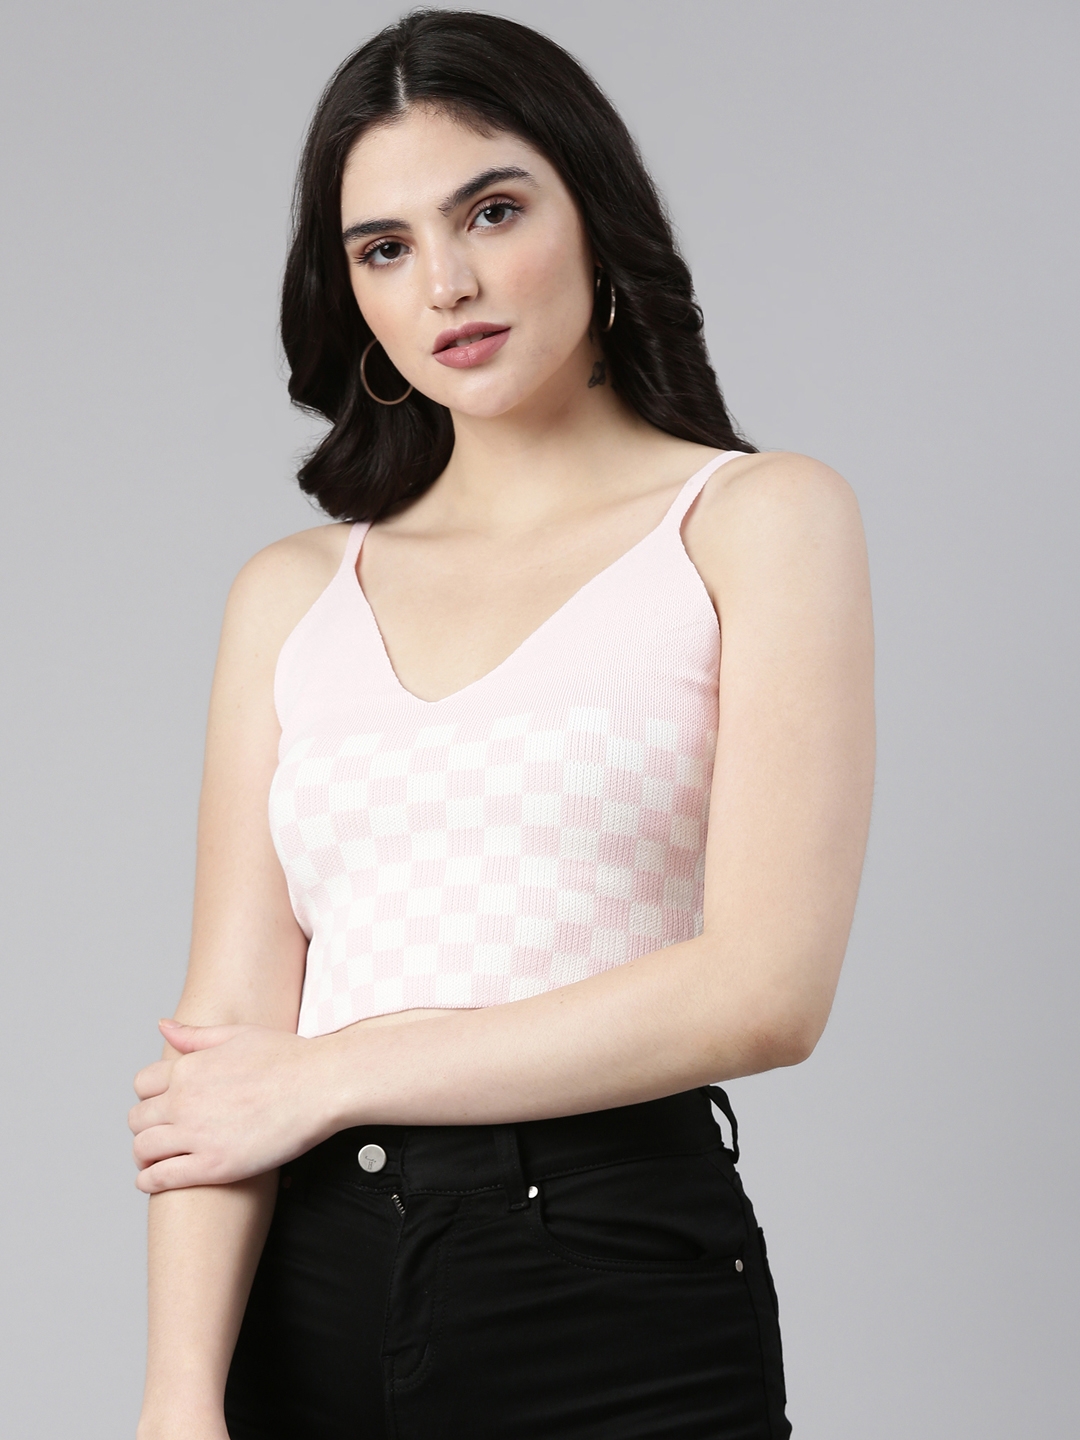 Showoff | SHOWOFF Women's Shoulder Straps Checked Sleeveless Fitted Pink Crop Top 3